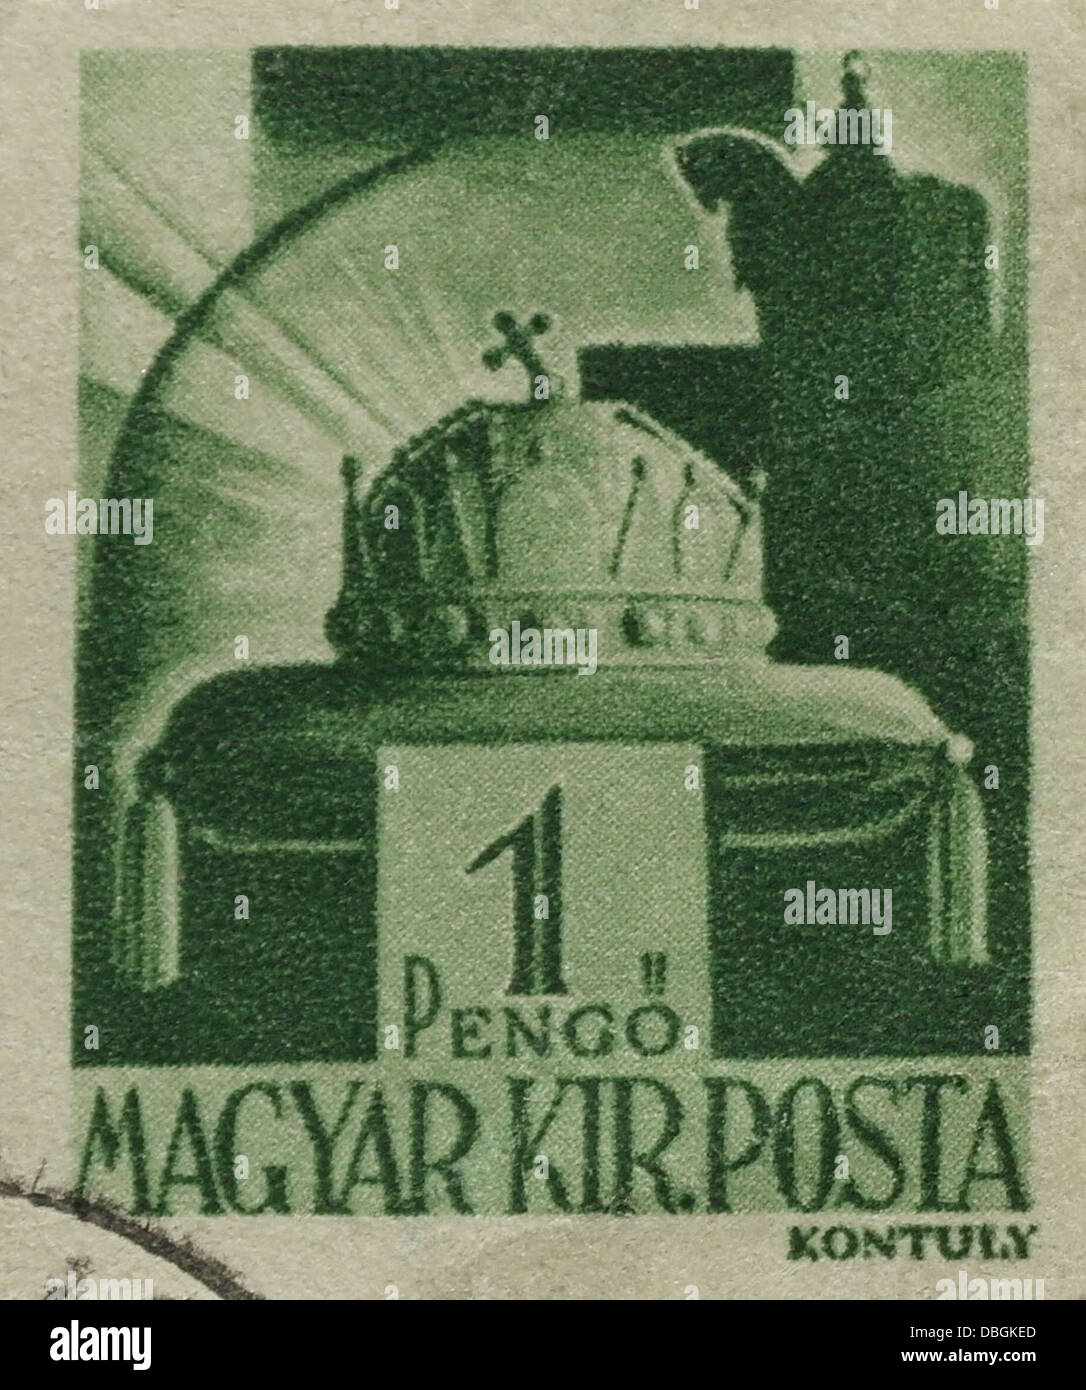 Green 1 Pengo Magyar Kiralyi Posta 'Holy Crown of Hungary' postage stamp, Liberation of Hungary Series, issued Budapest, 1945 Stock Photo